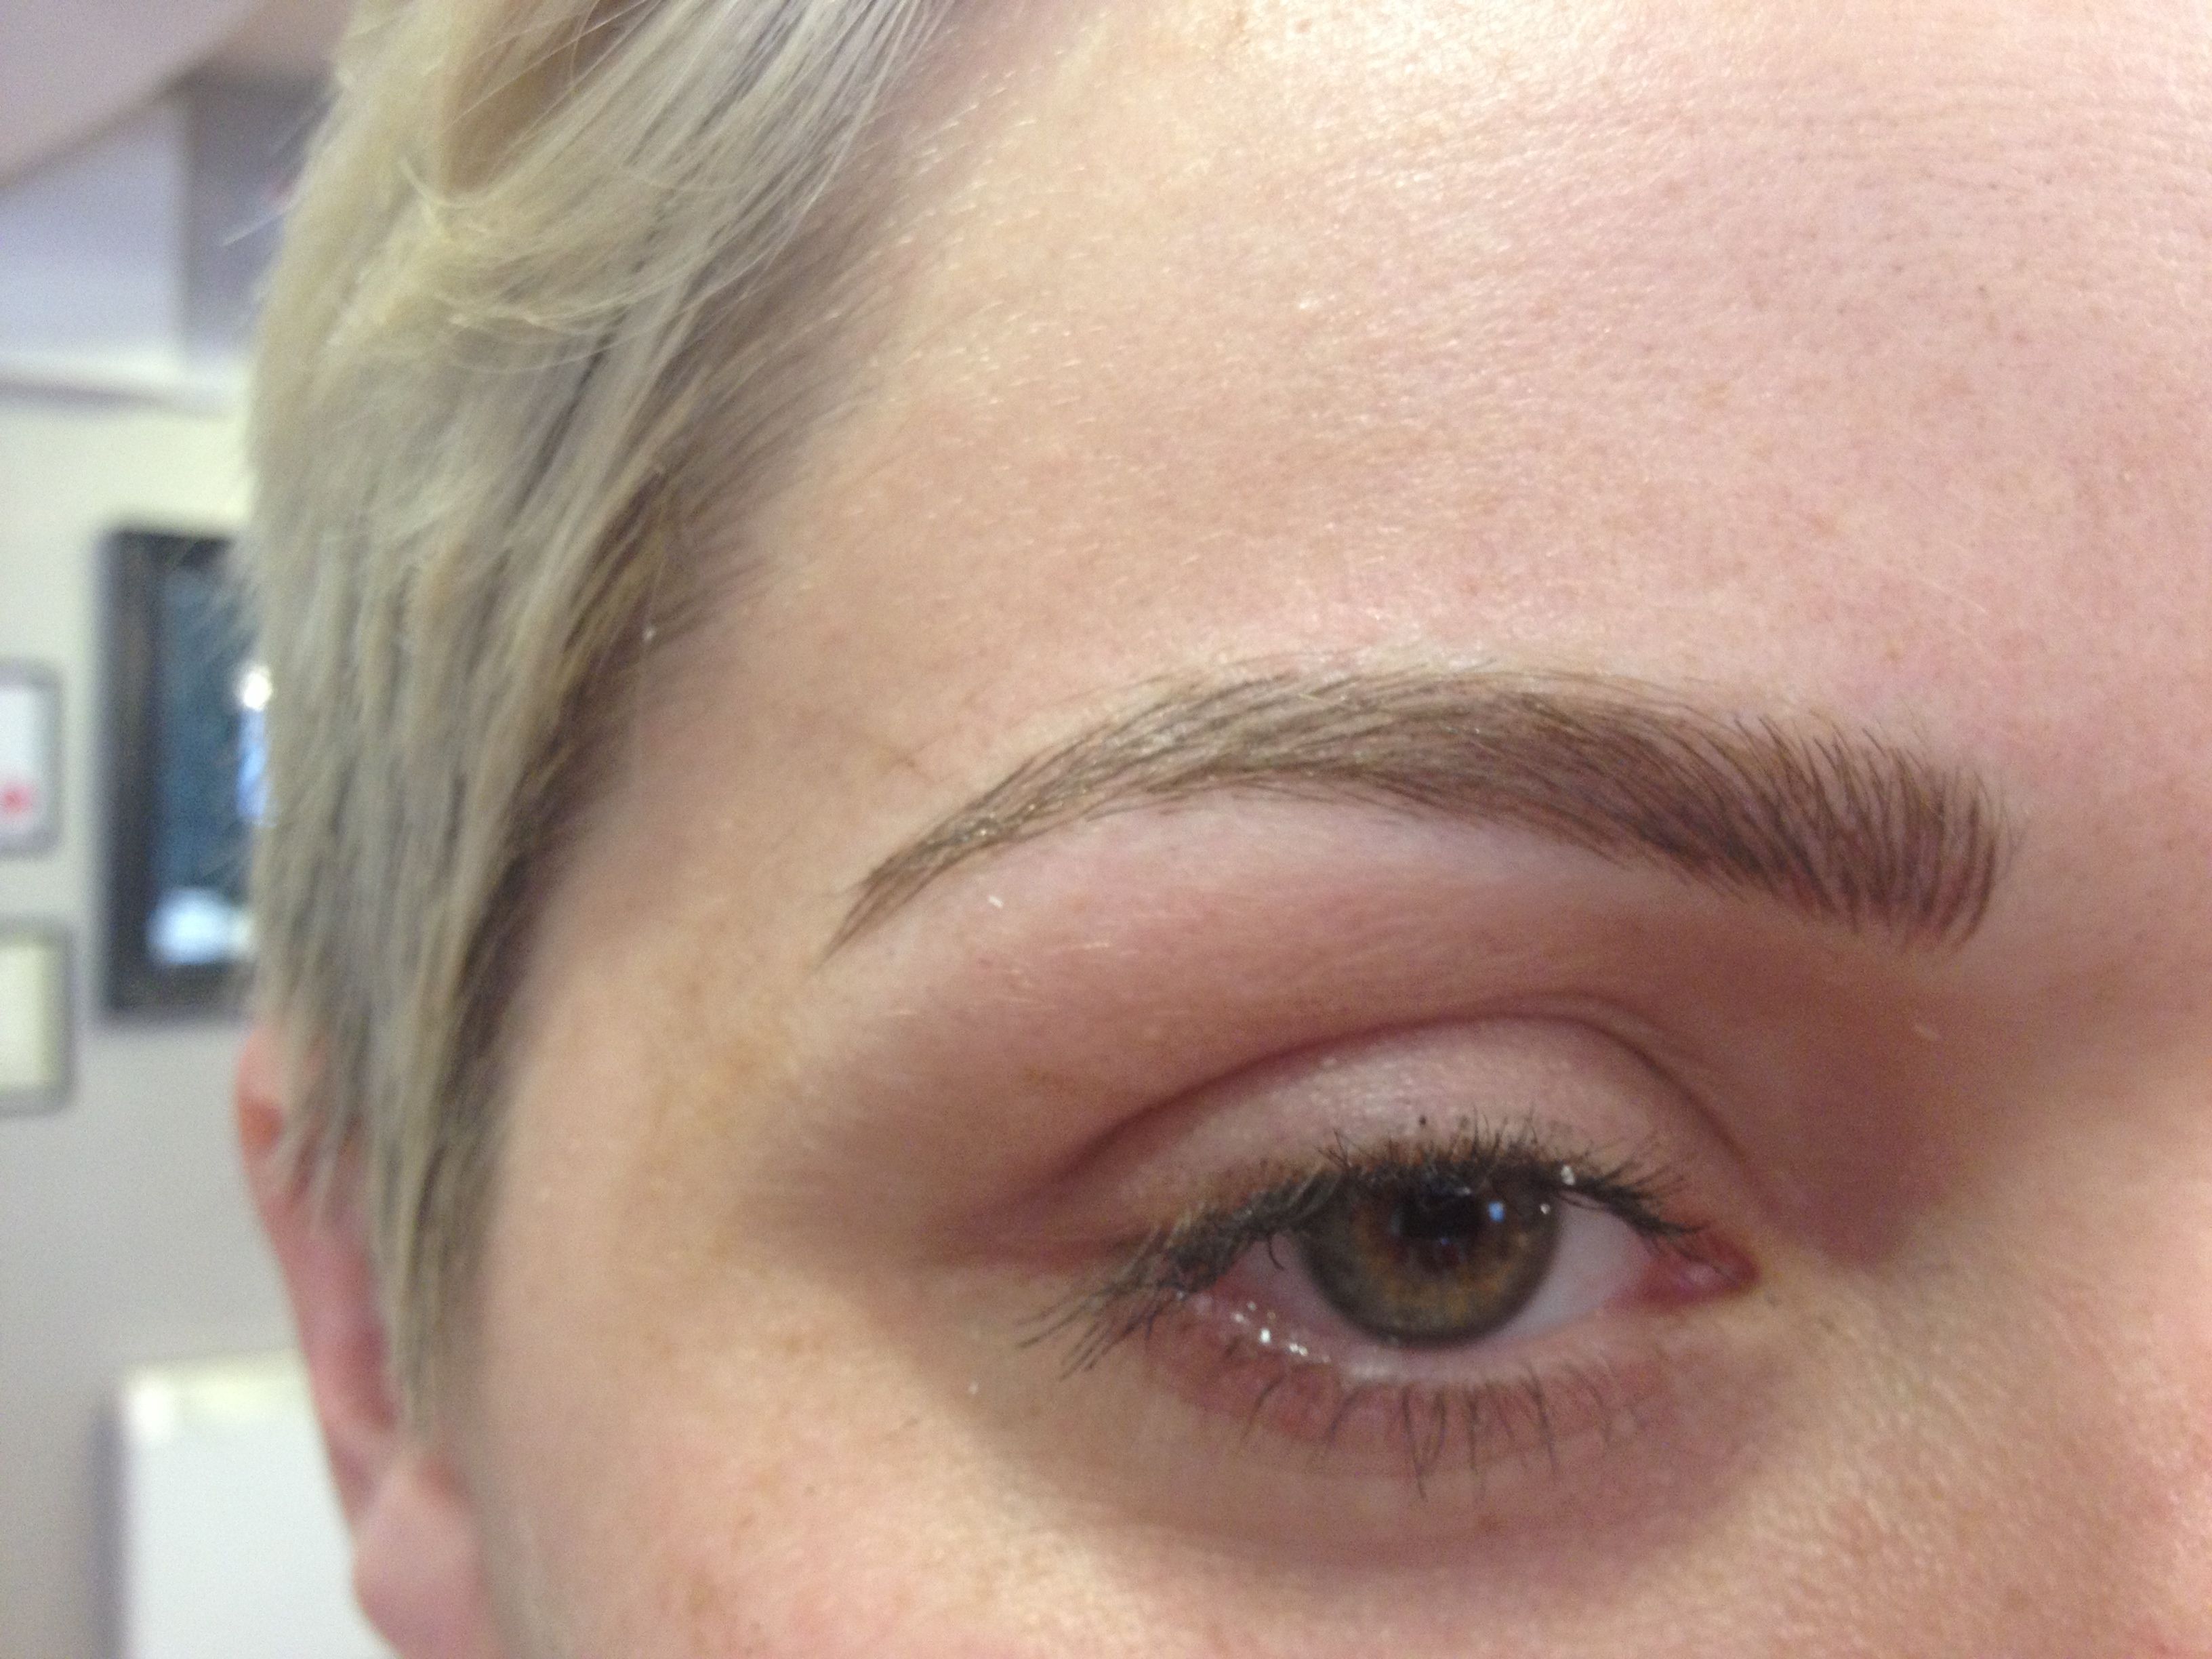 Semi permanent brow tattoo: embrowdery tried and tested ...